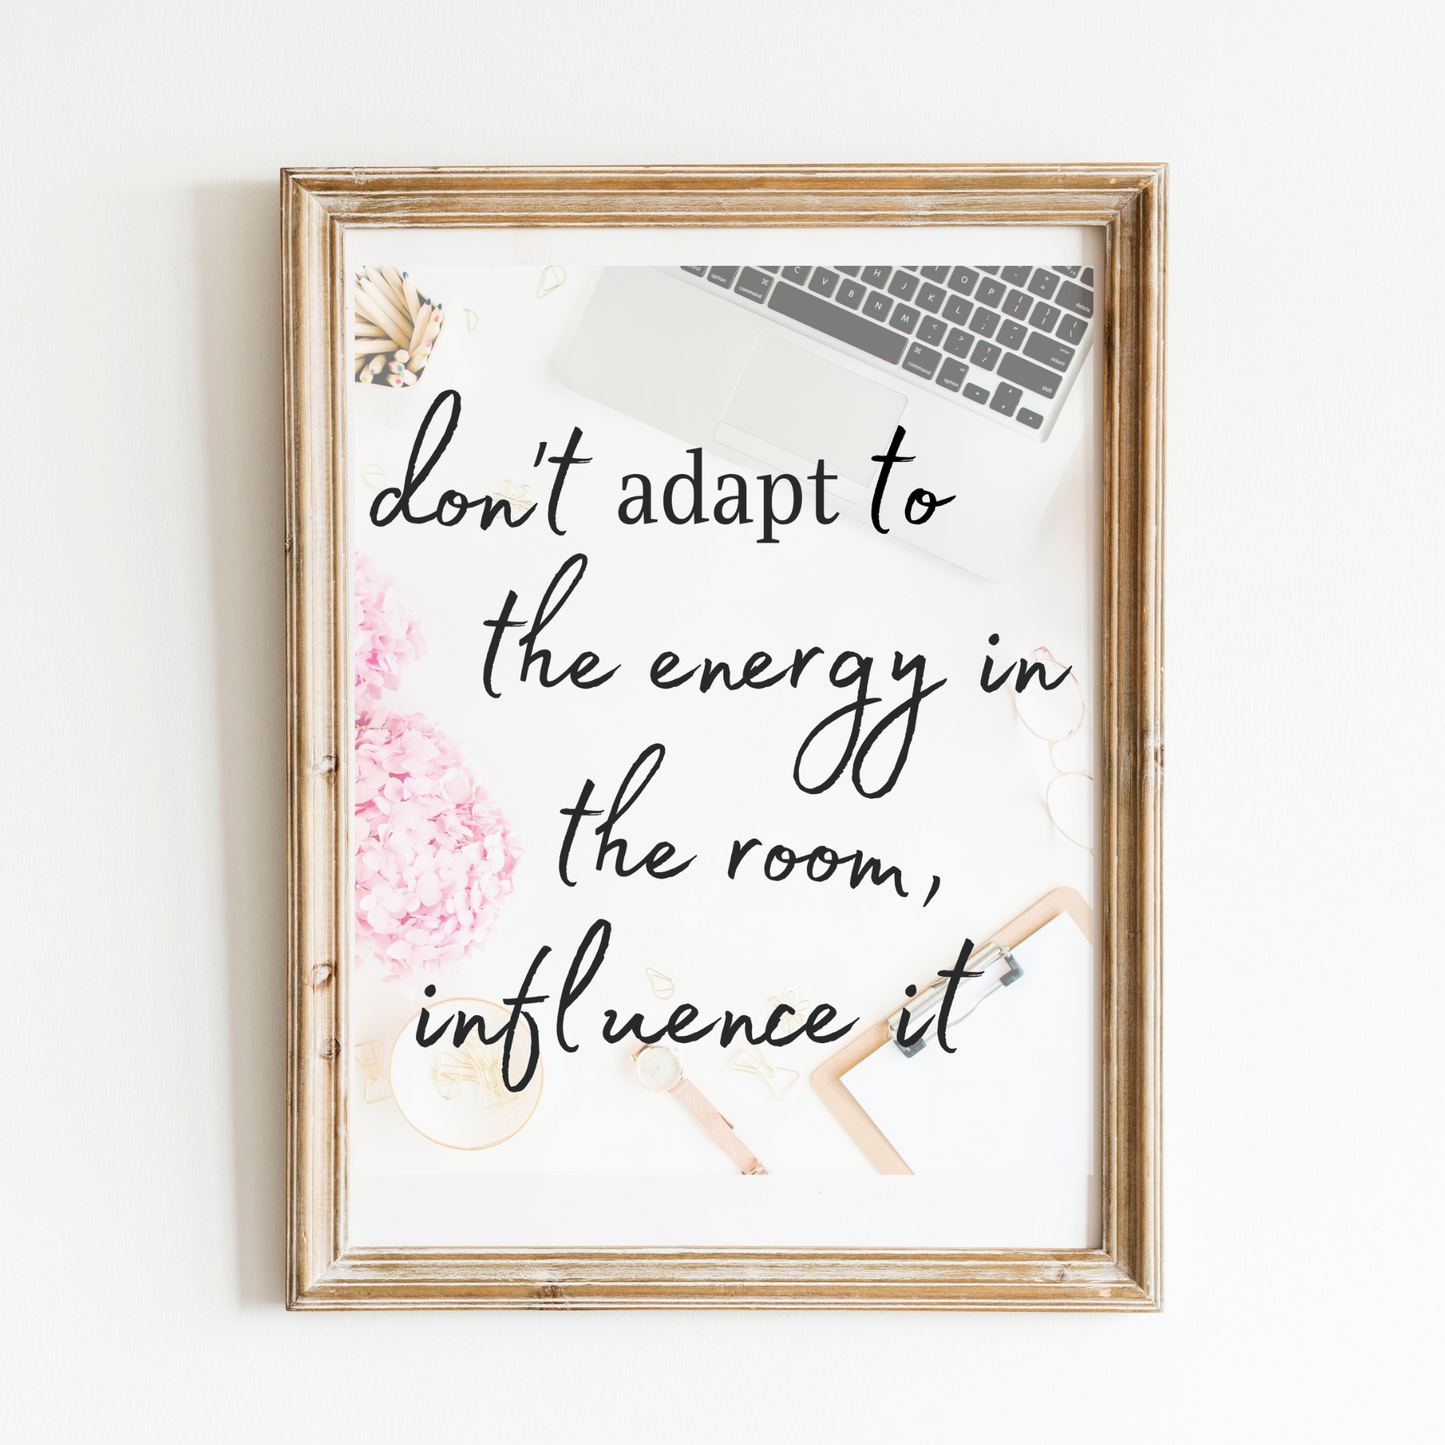 Inspirational Quotes for a Tuesday Morning| Affirmations for Work Life Balance -Don't Adapt to Energy Bundle